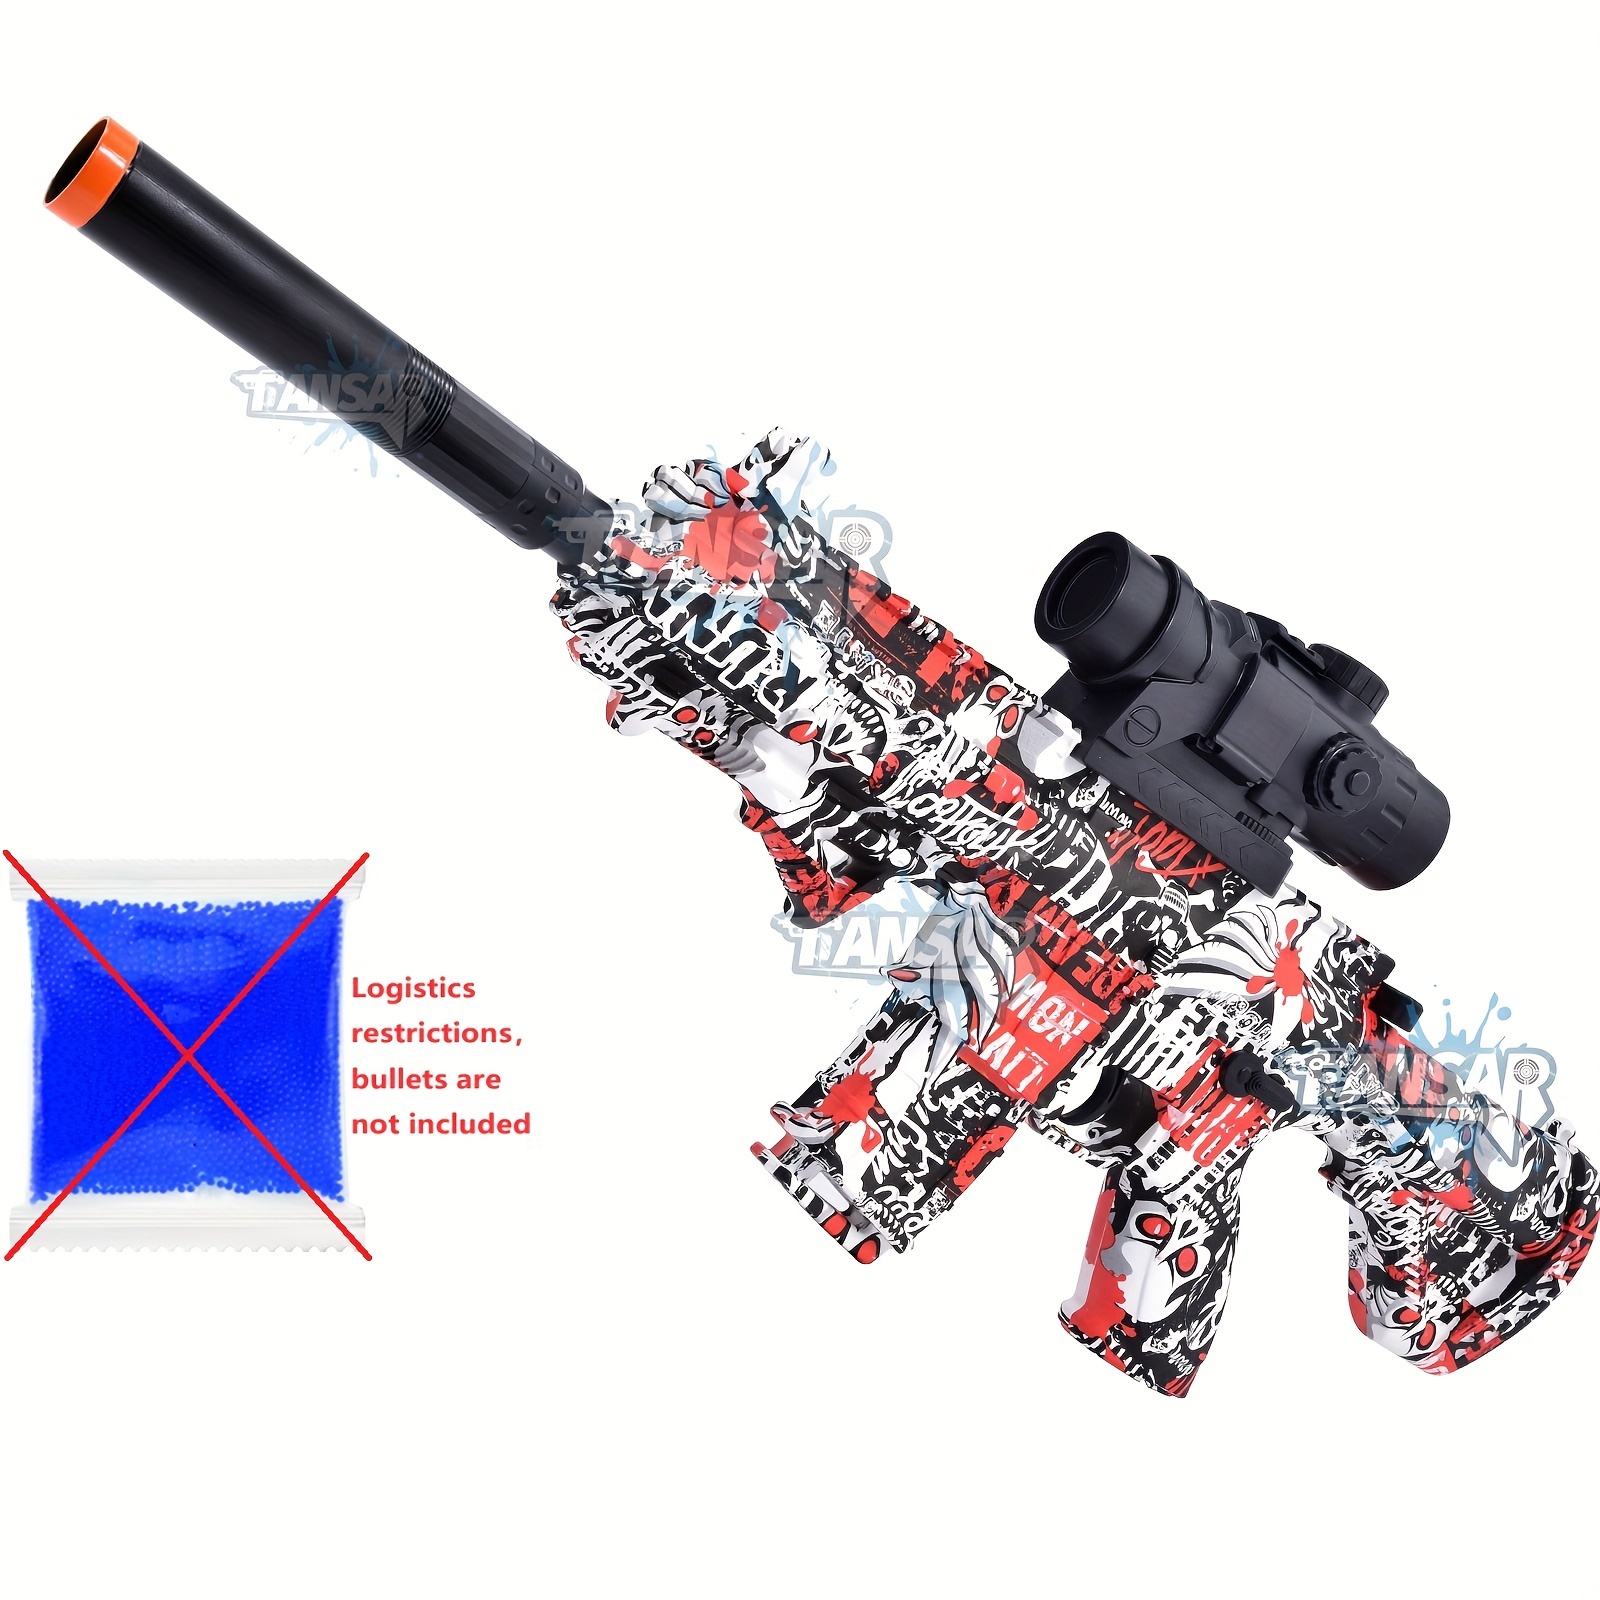 Splatter Ball Gun,Gel Blaster Gun Automatic with Goggles and 30000 Water  Beads Ammo,Electric Gel Ball Blaster for Outdoor Activities Shooting Team  Game Gifts for Teens,Boys and Girls 